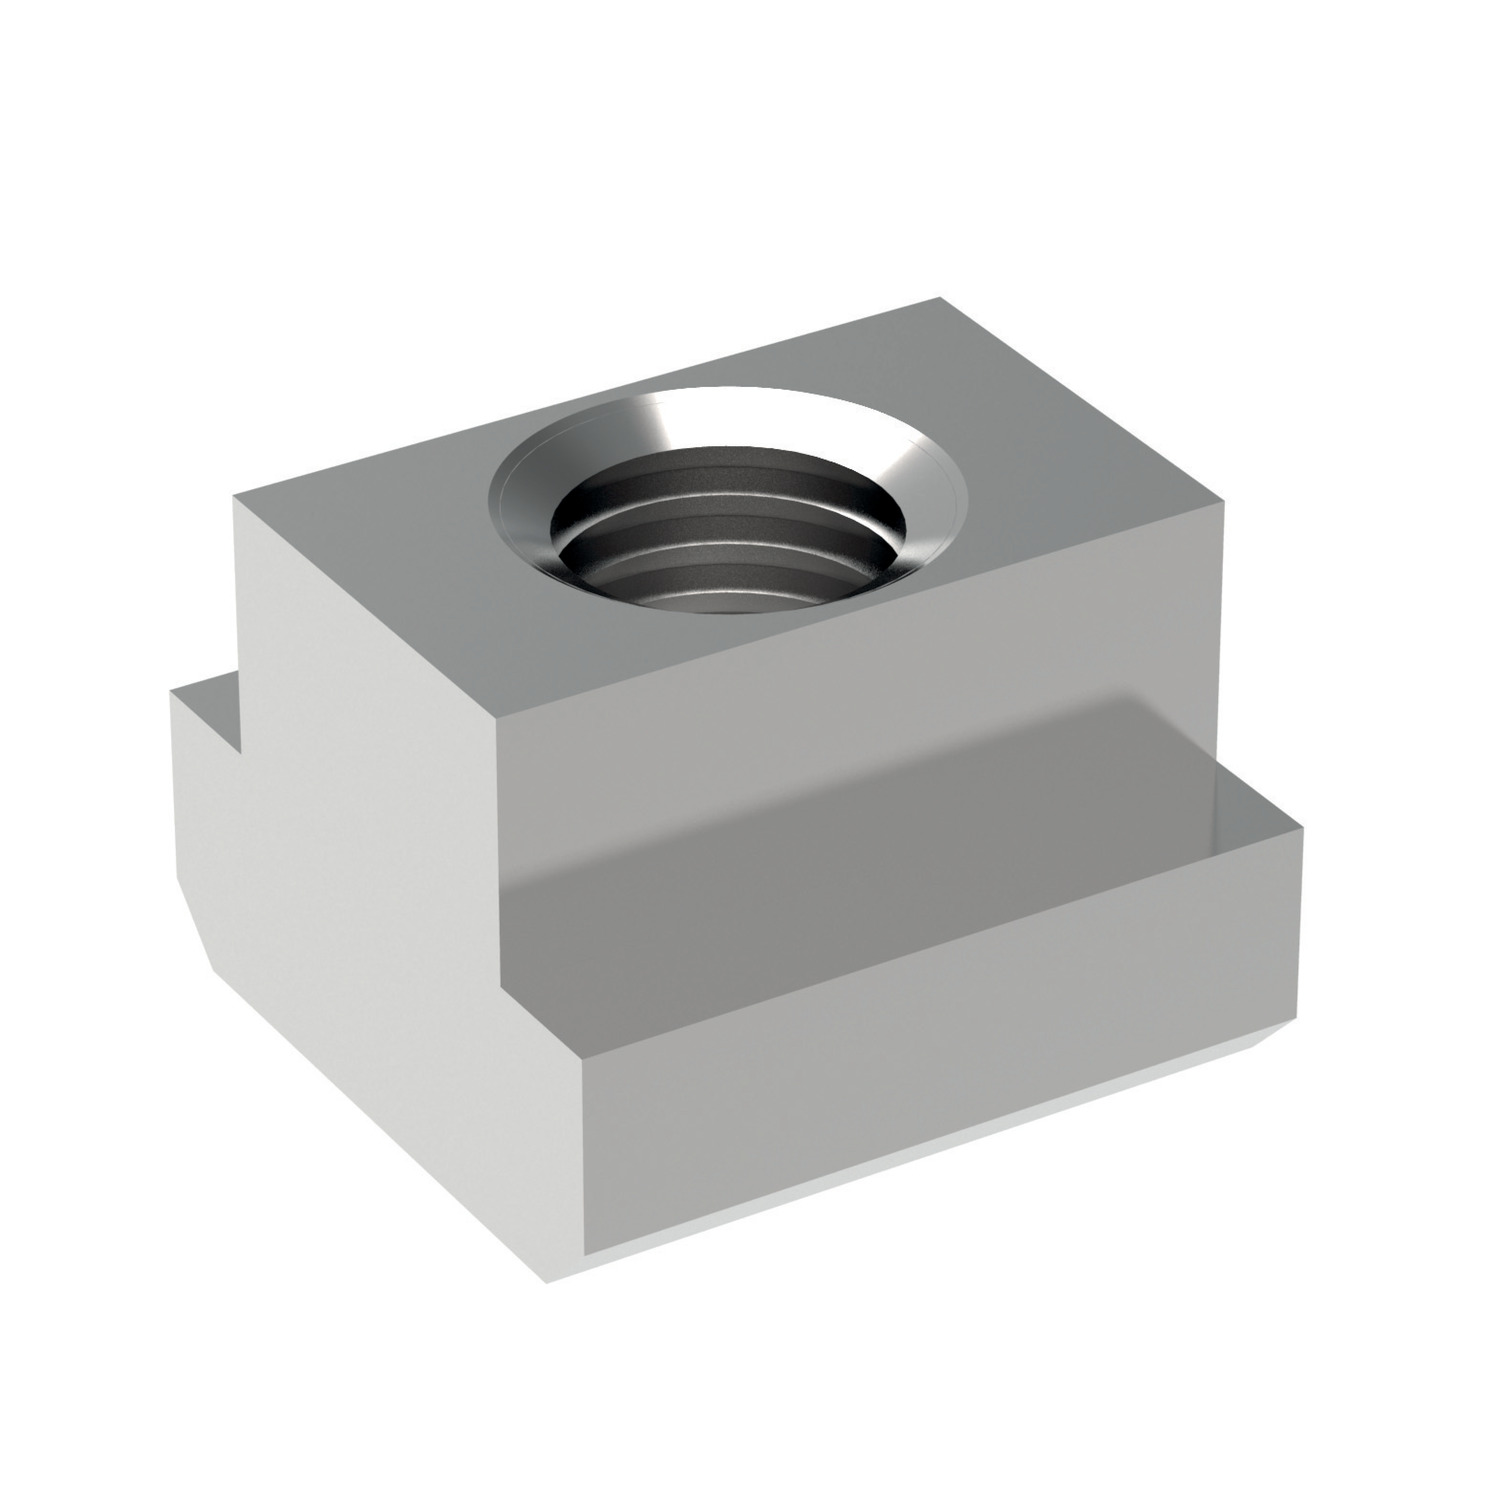 T-Nuts Stainless steel t-nuts made to din 508. Ideal for corrosion resistant applications.
